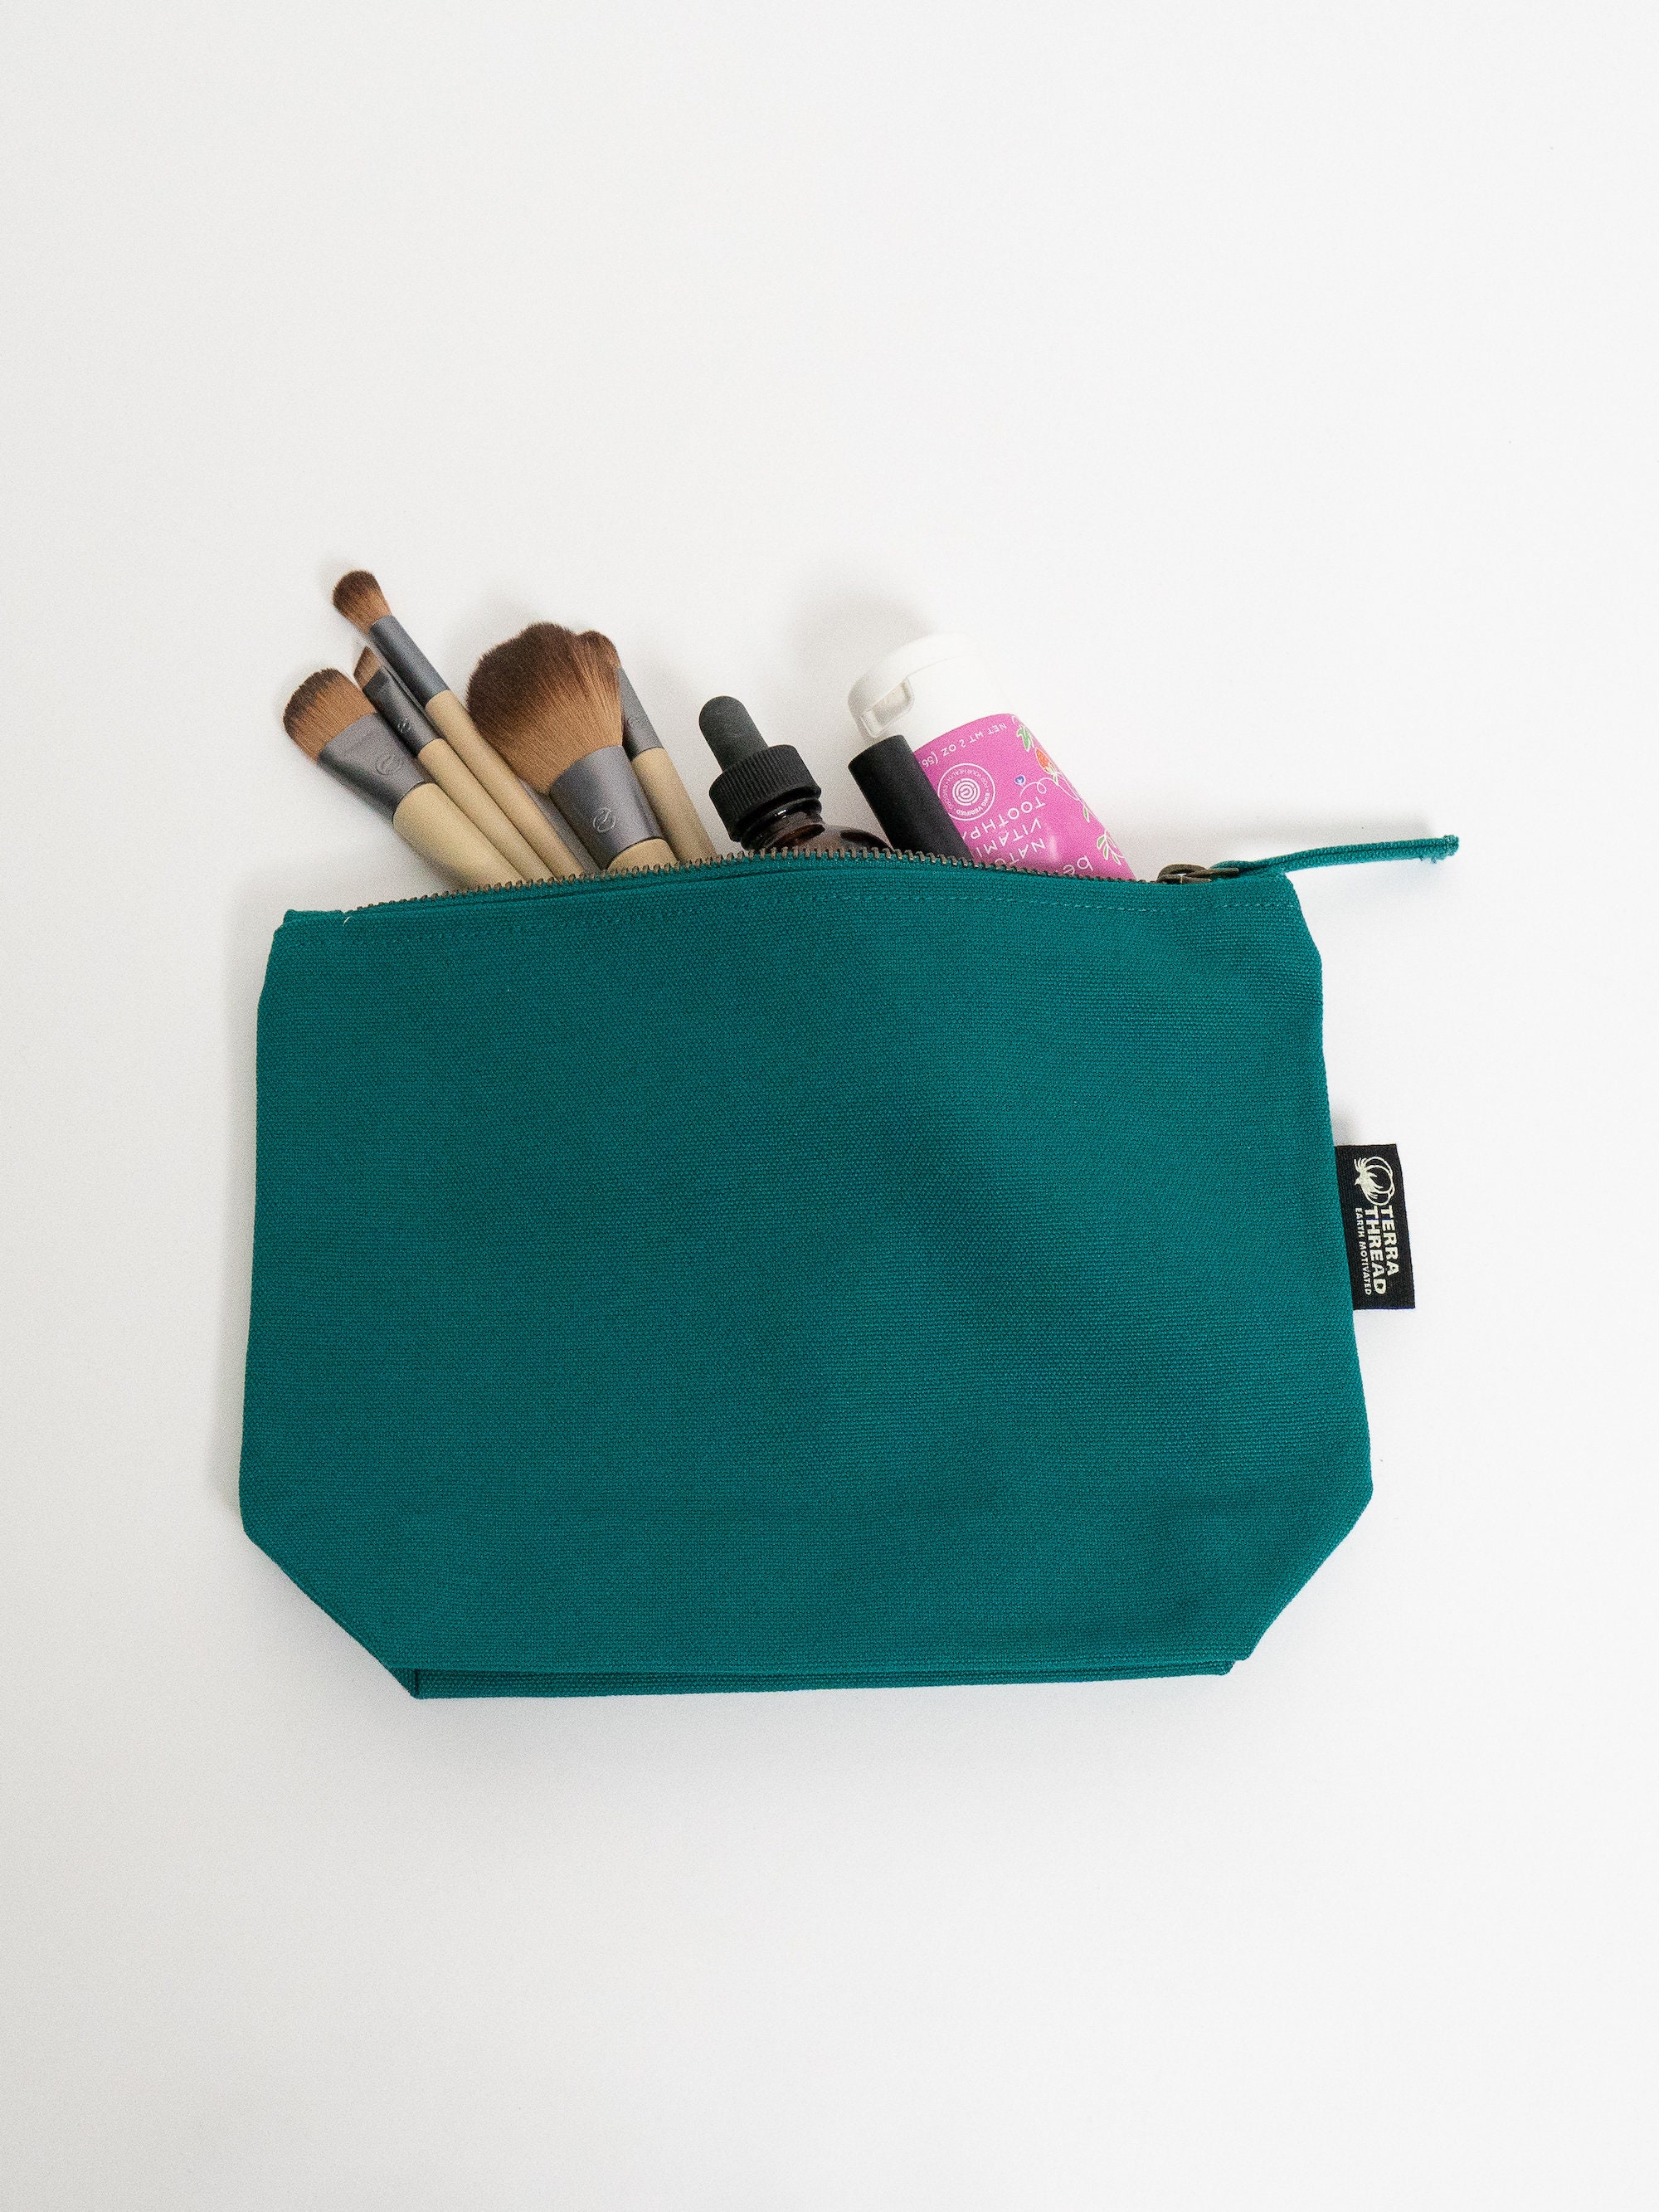 Organic Cotton Zipper Pouch for Pencils, Makeup, and More